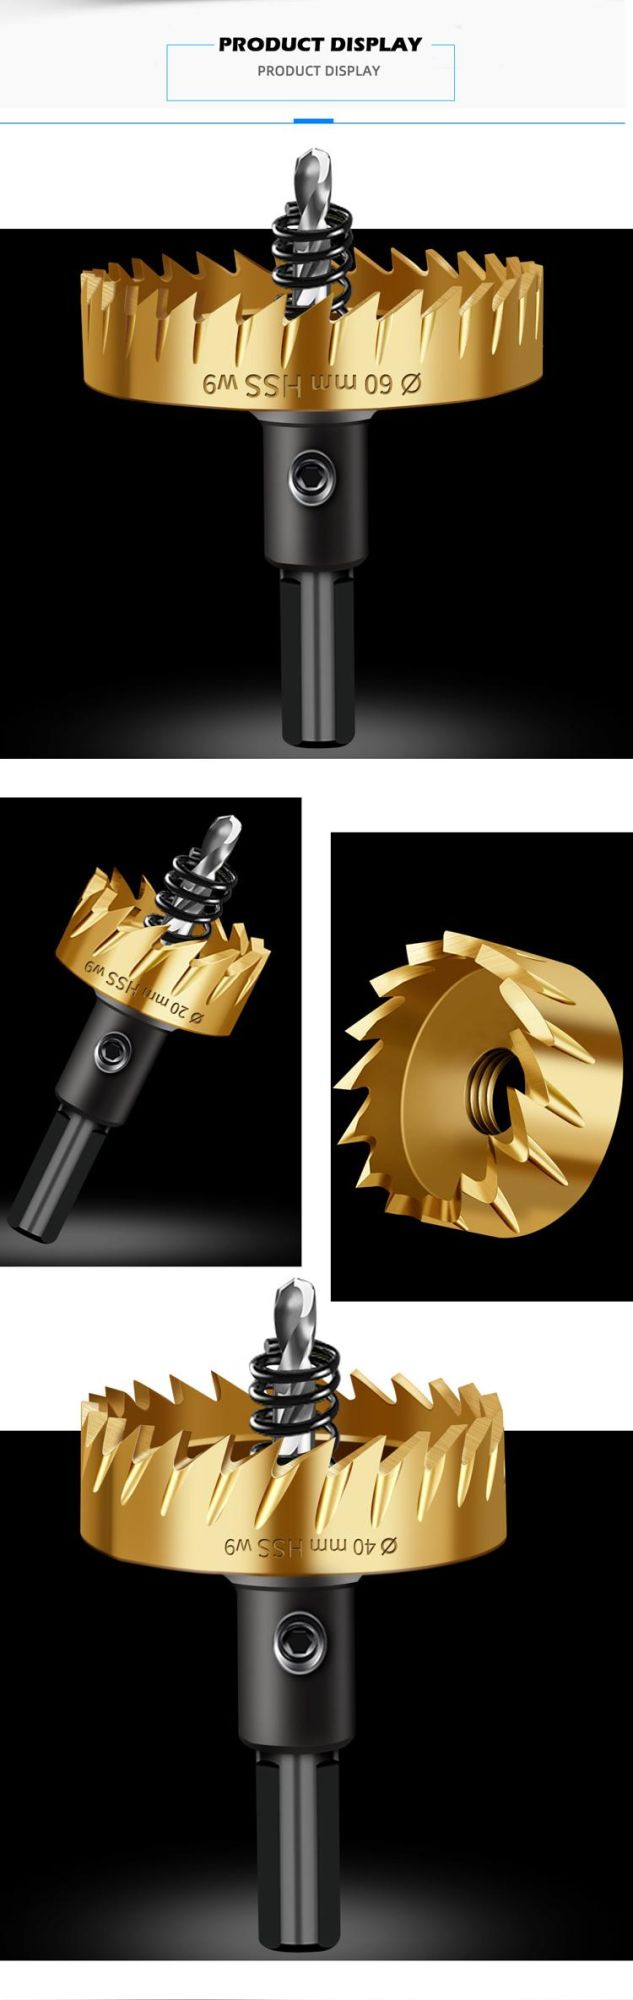 Titanium Coated HSS Drill Bit Hole Saw for Metal Drilling